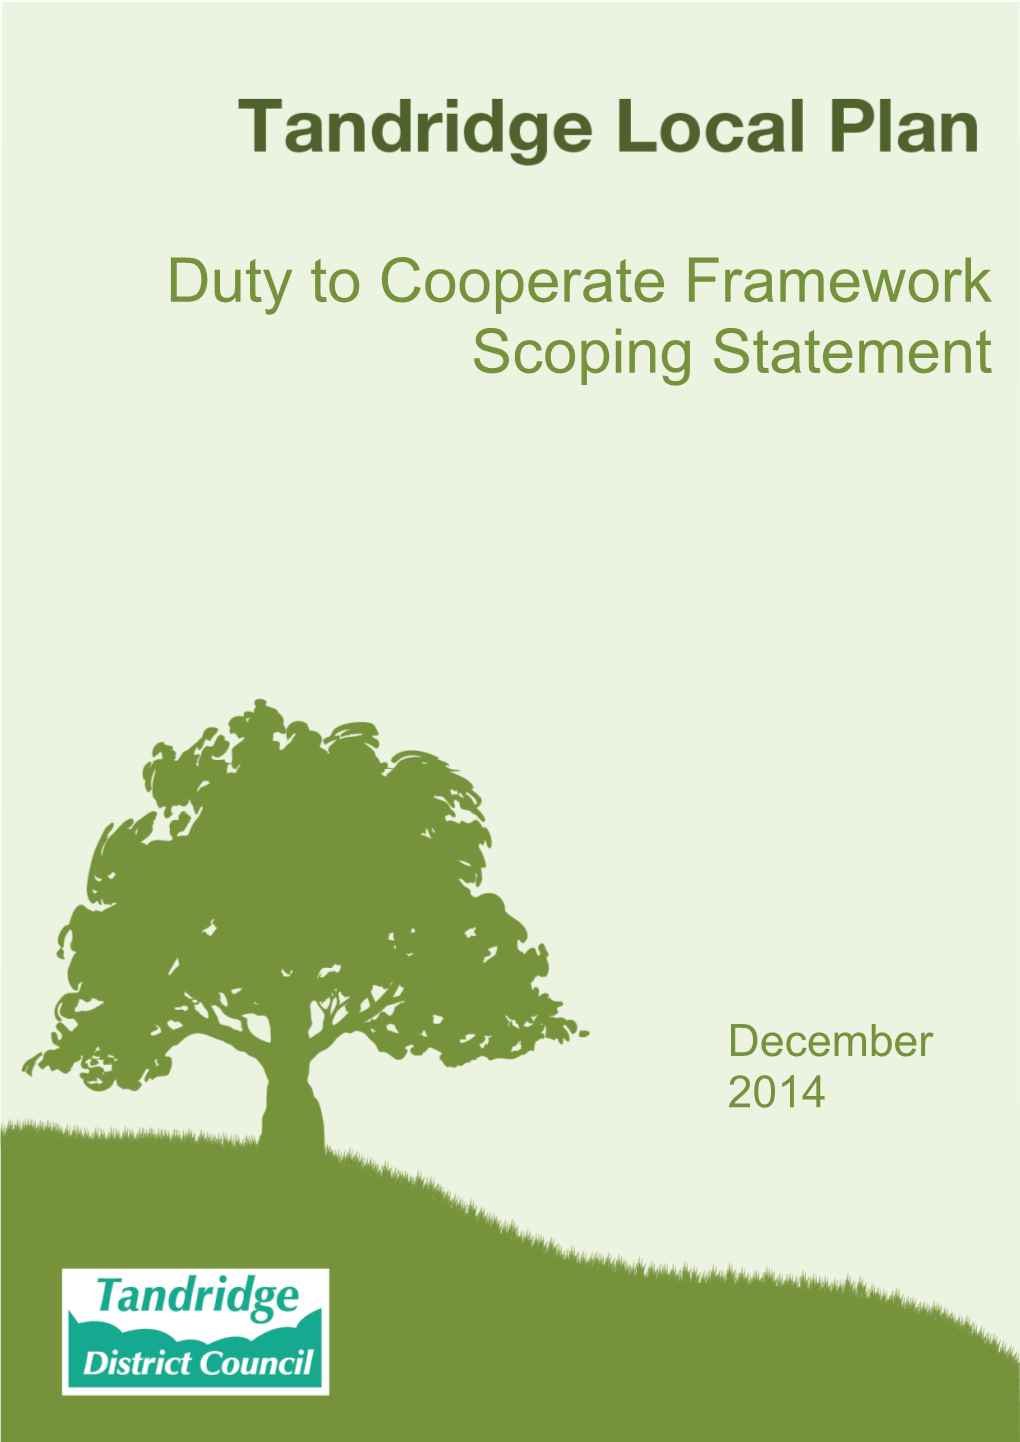 Duty to Cooperate Framework Scoping Statement